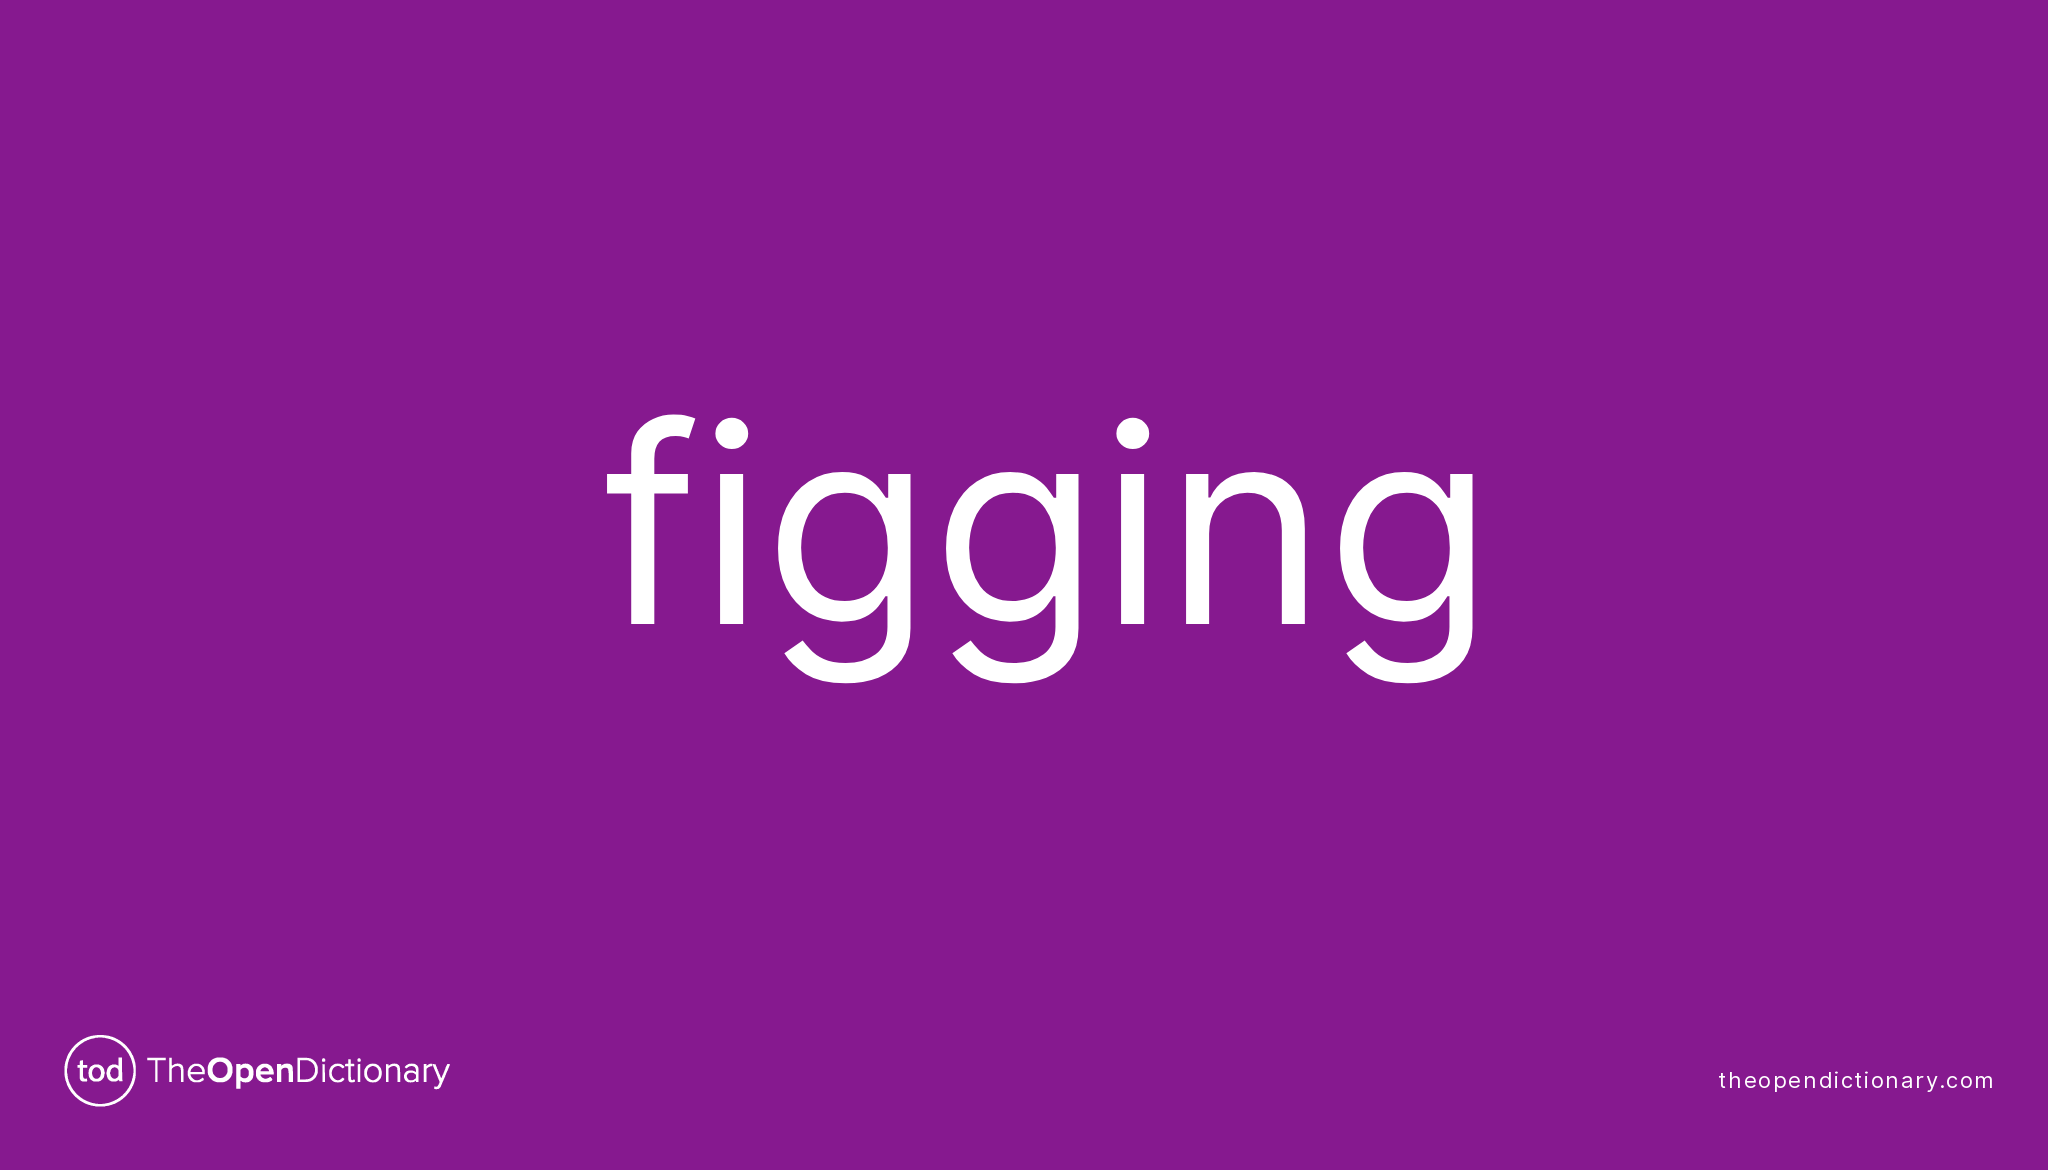 Figging | Meaning of | Definition of Figging | Example of Figging